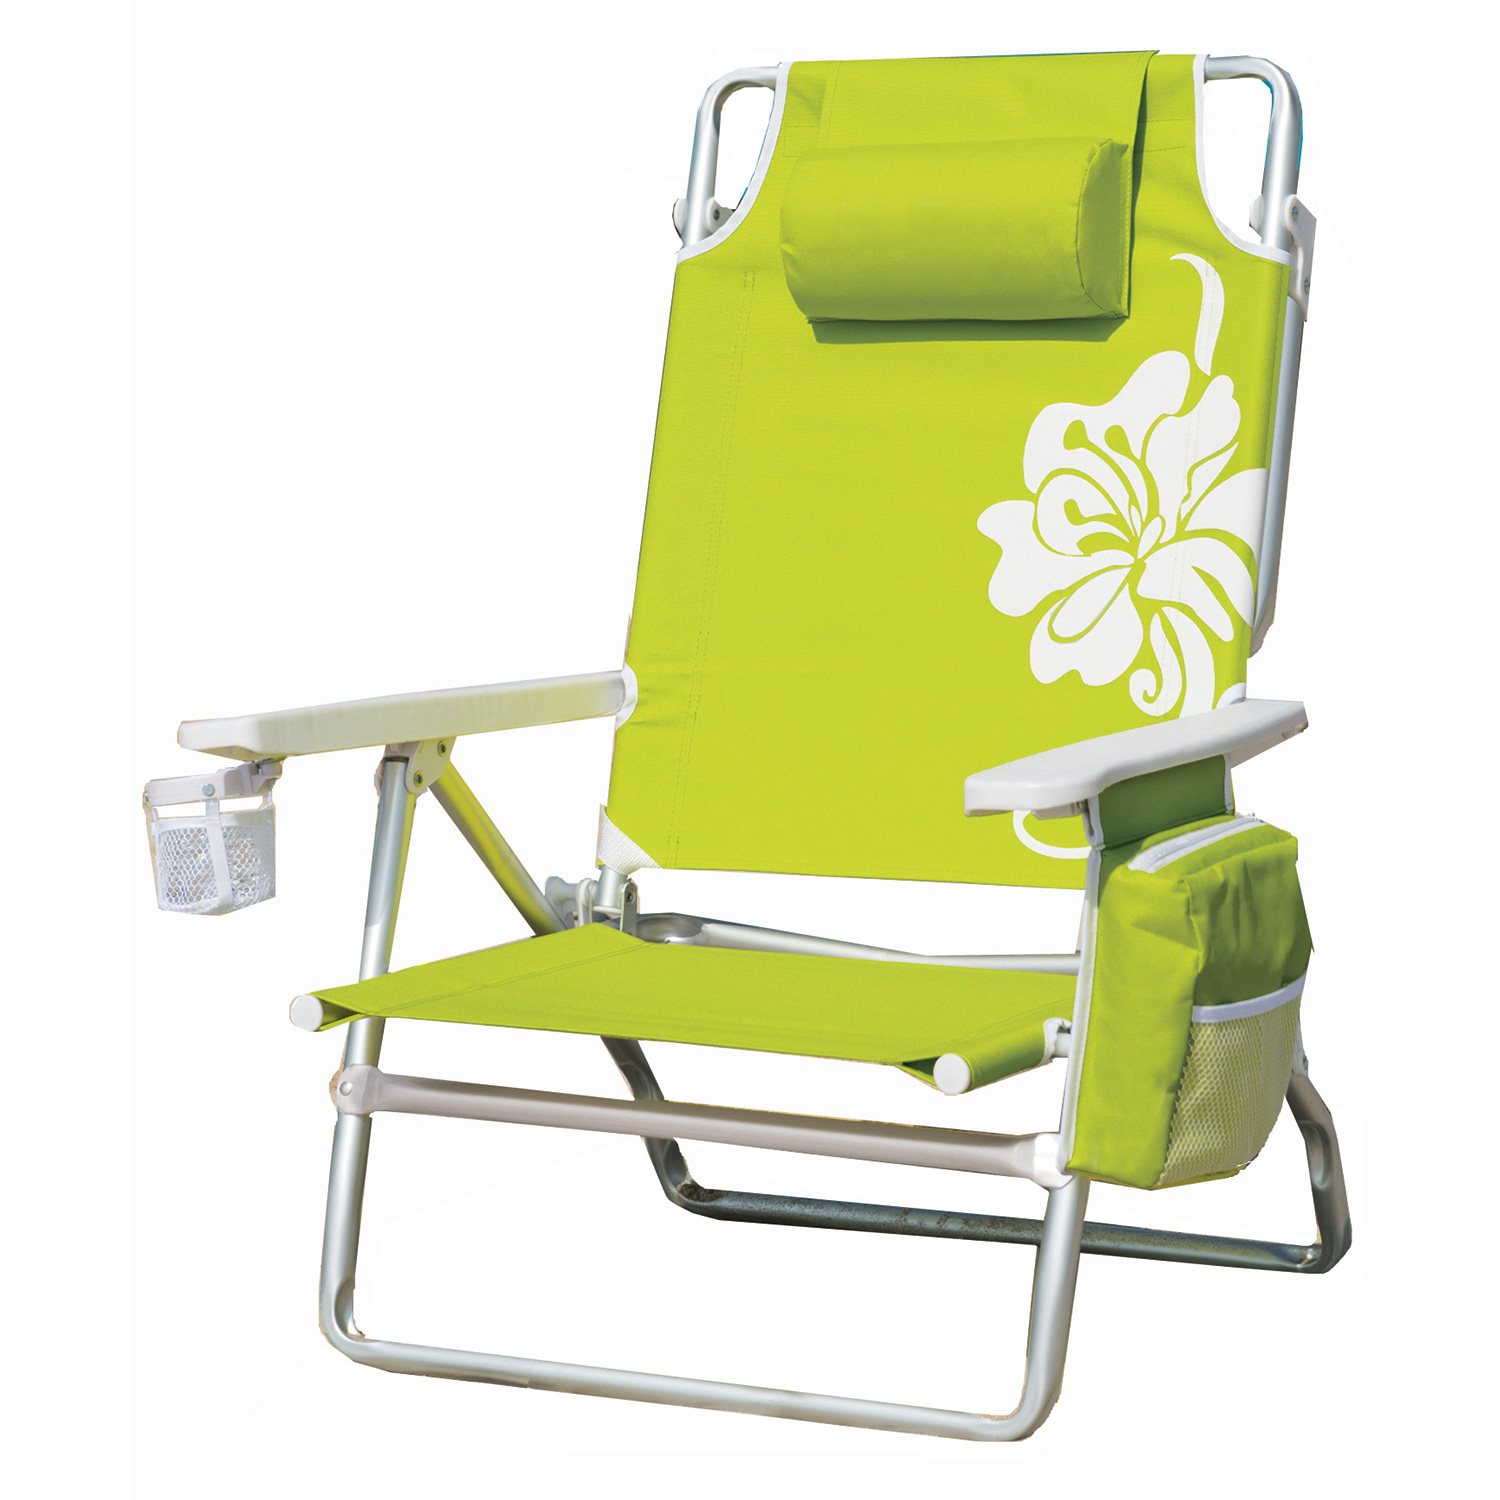 New Nautica Lime Beach Chair for Small Space